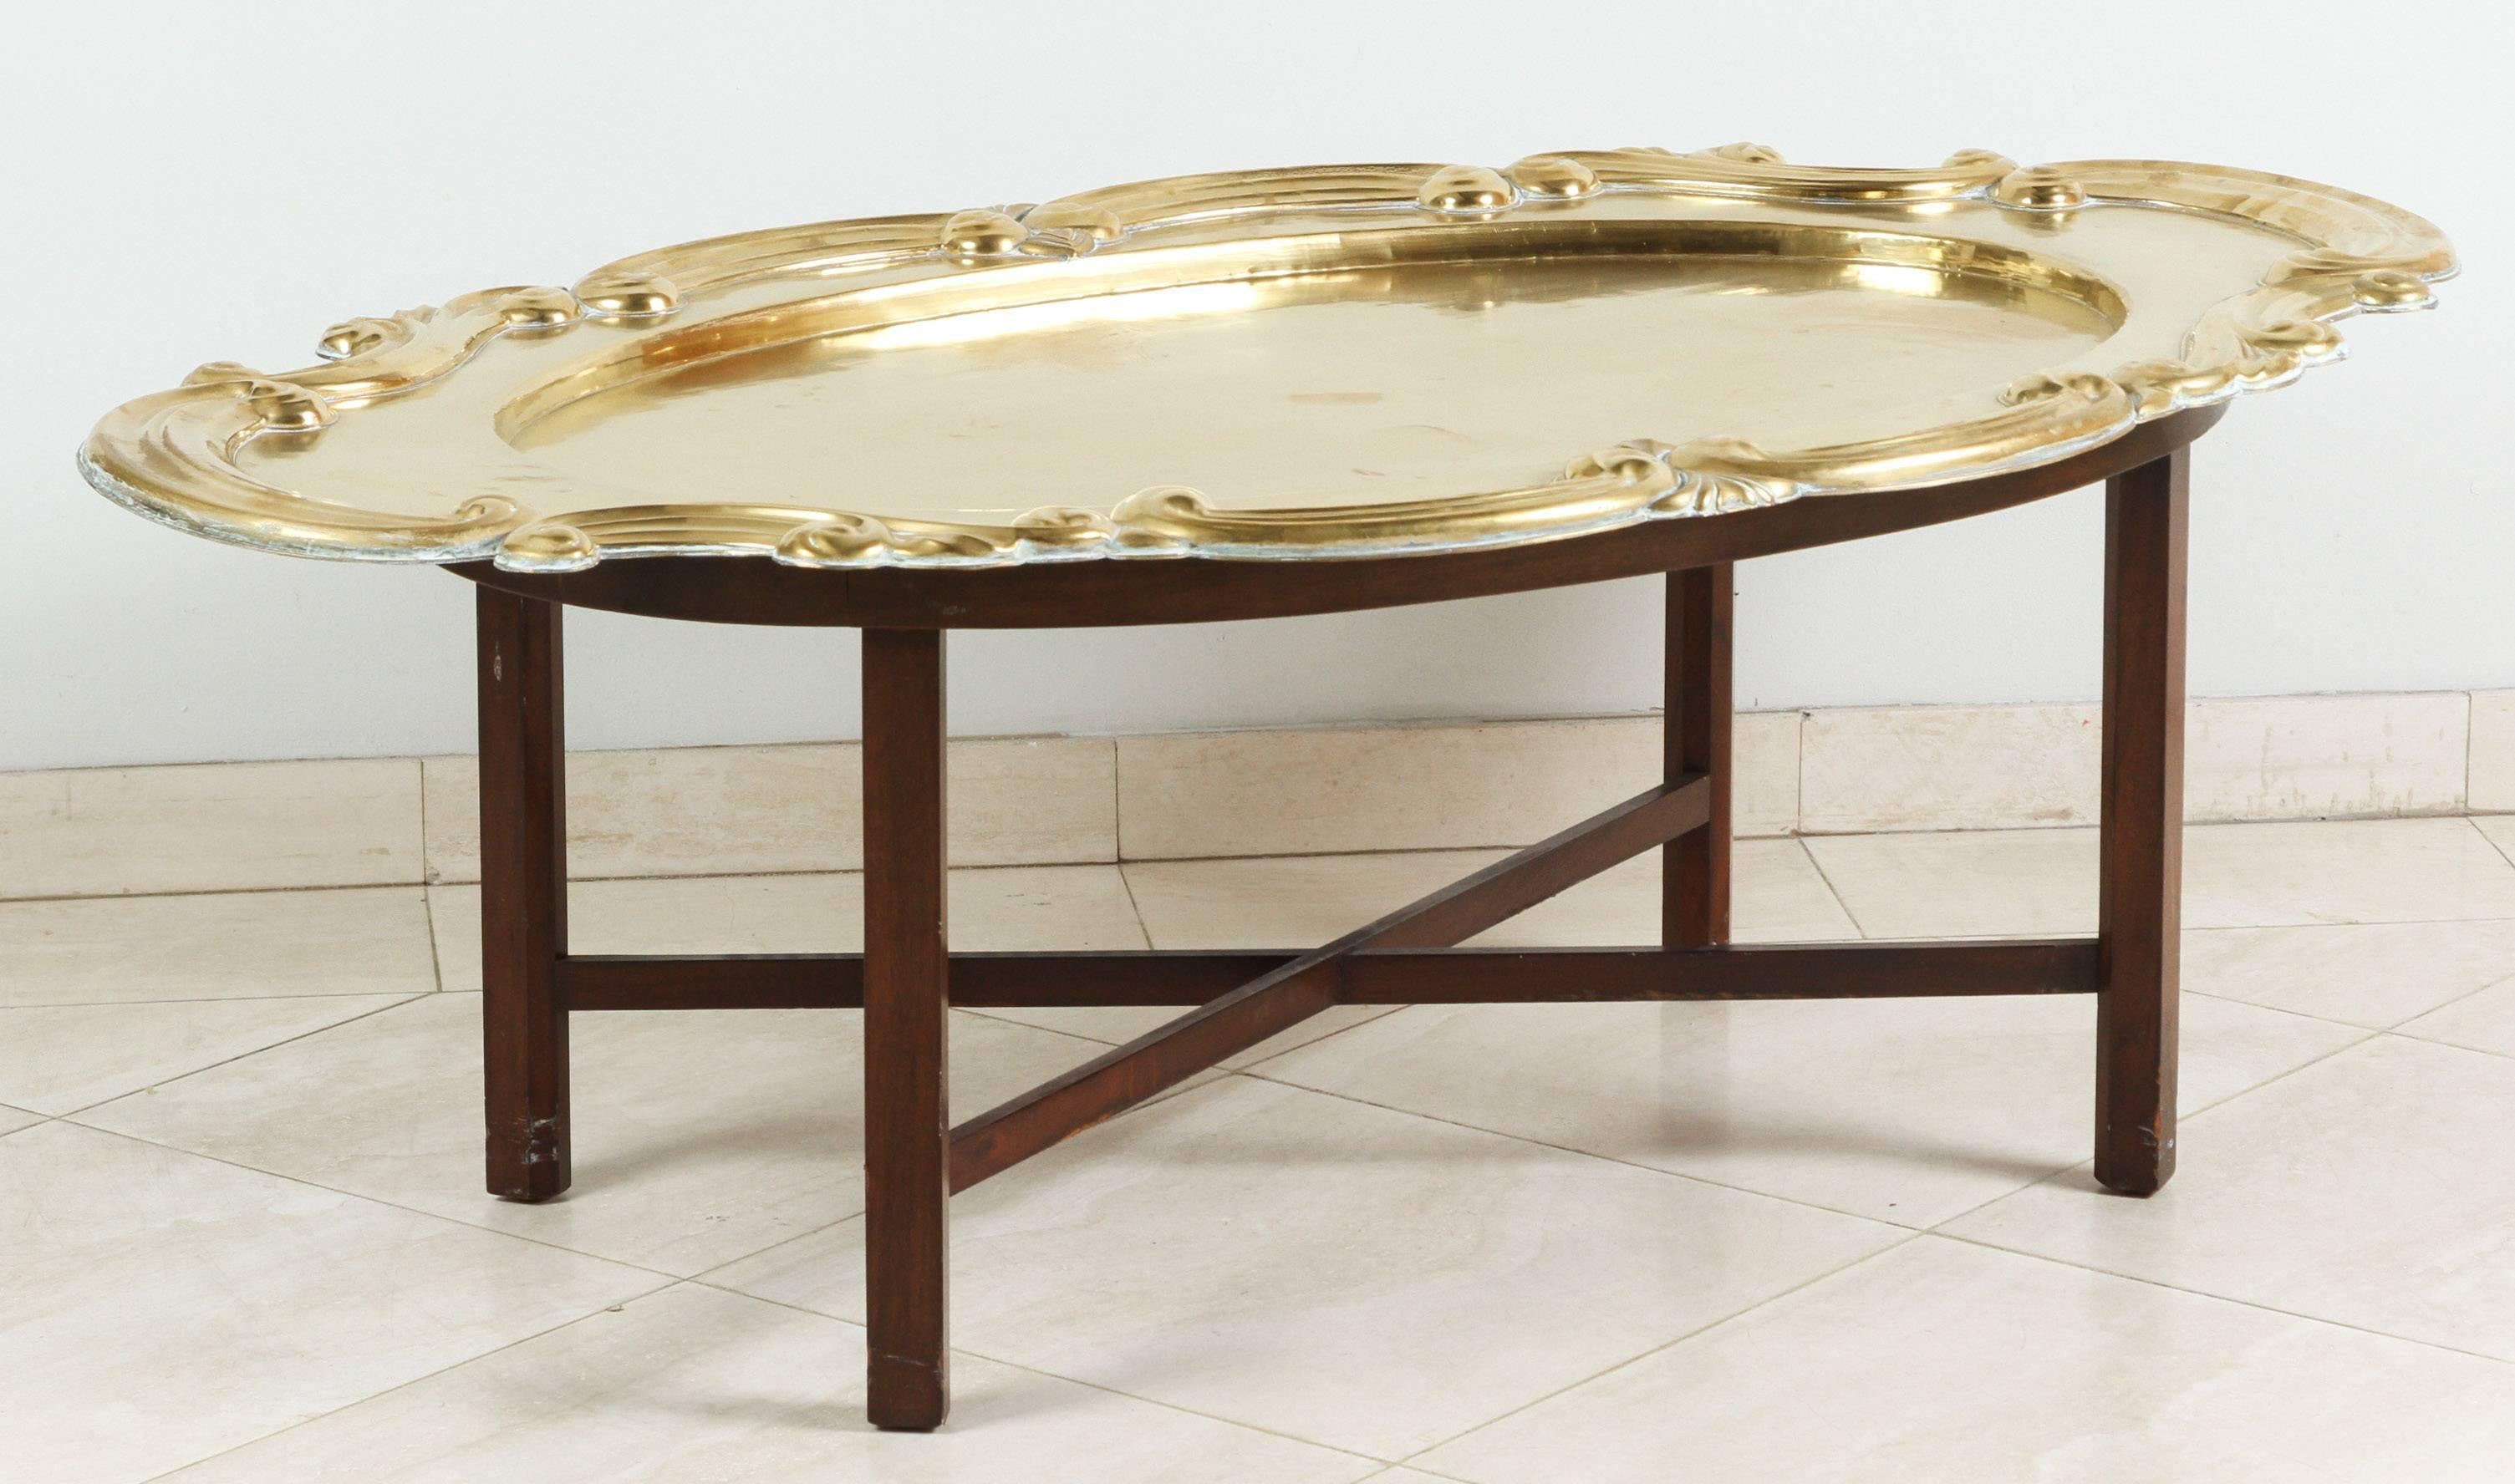 Hollywood Regency Vintage Oval Brass Tray Moorish Table In Good Condition For Sale In North Hollywood, CA